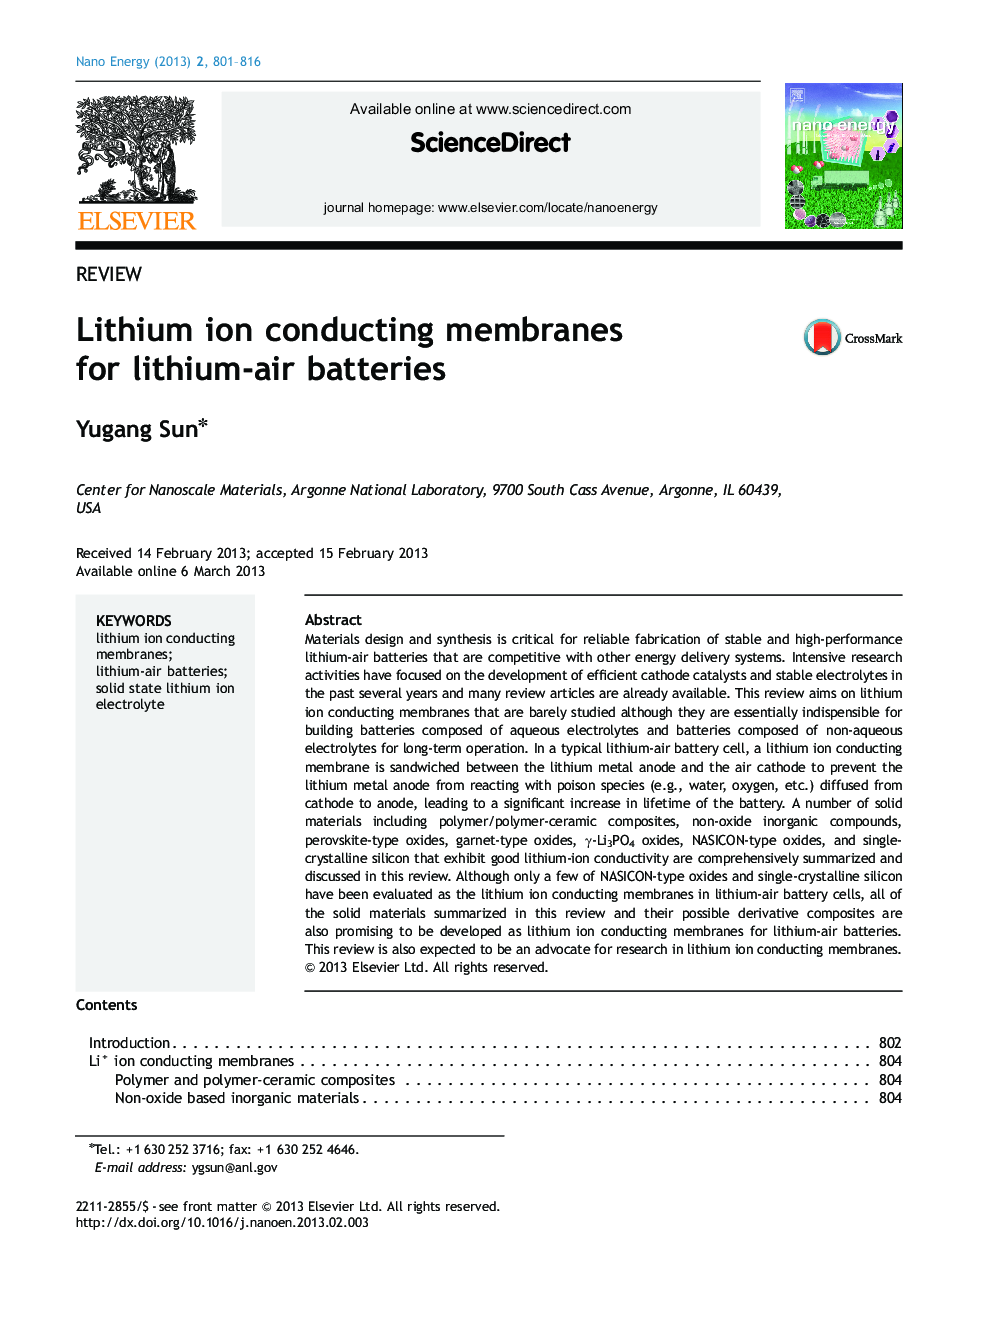 Lithium ion conducting membranes for lithium-air batteries